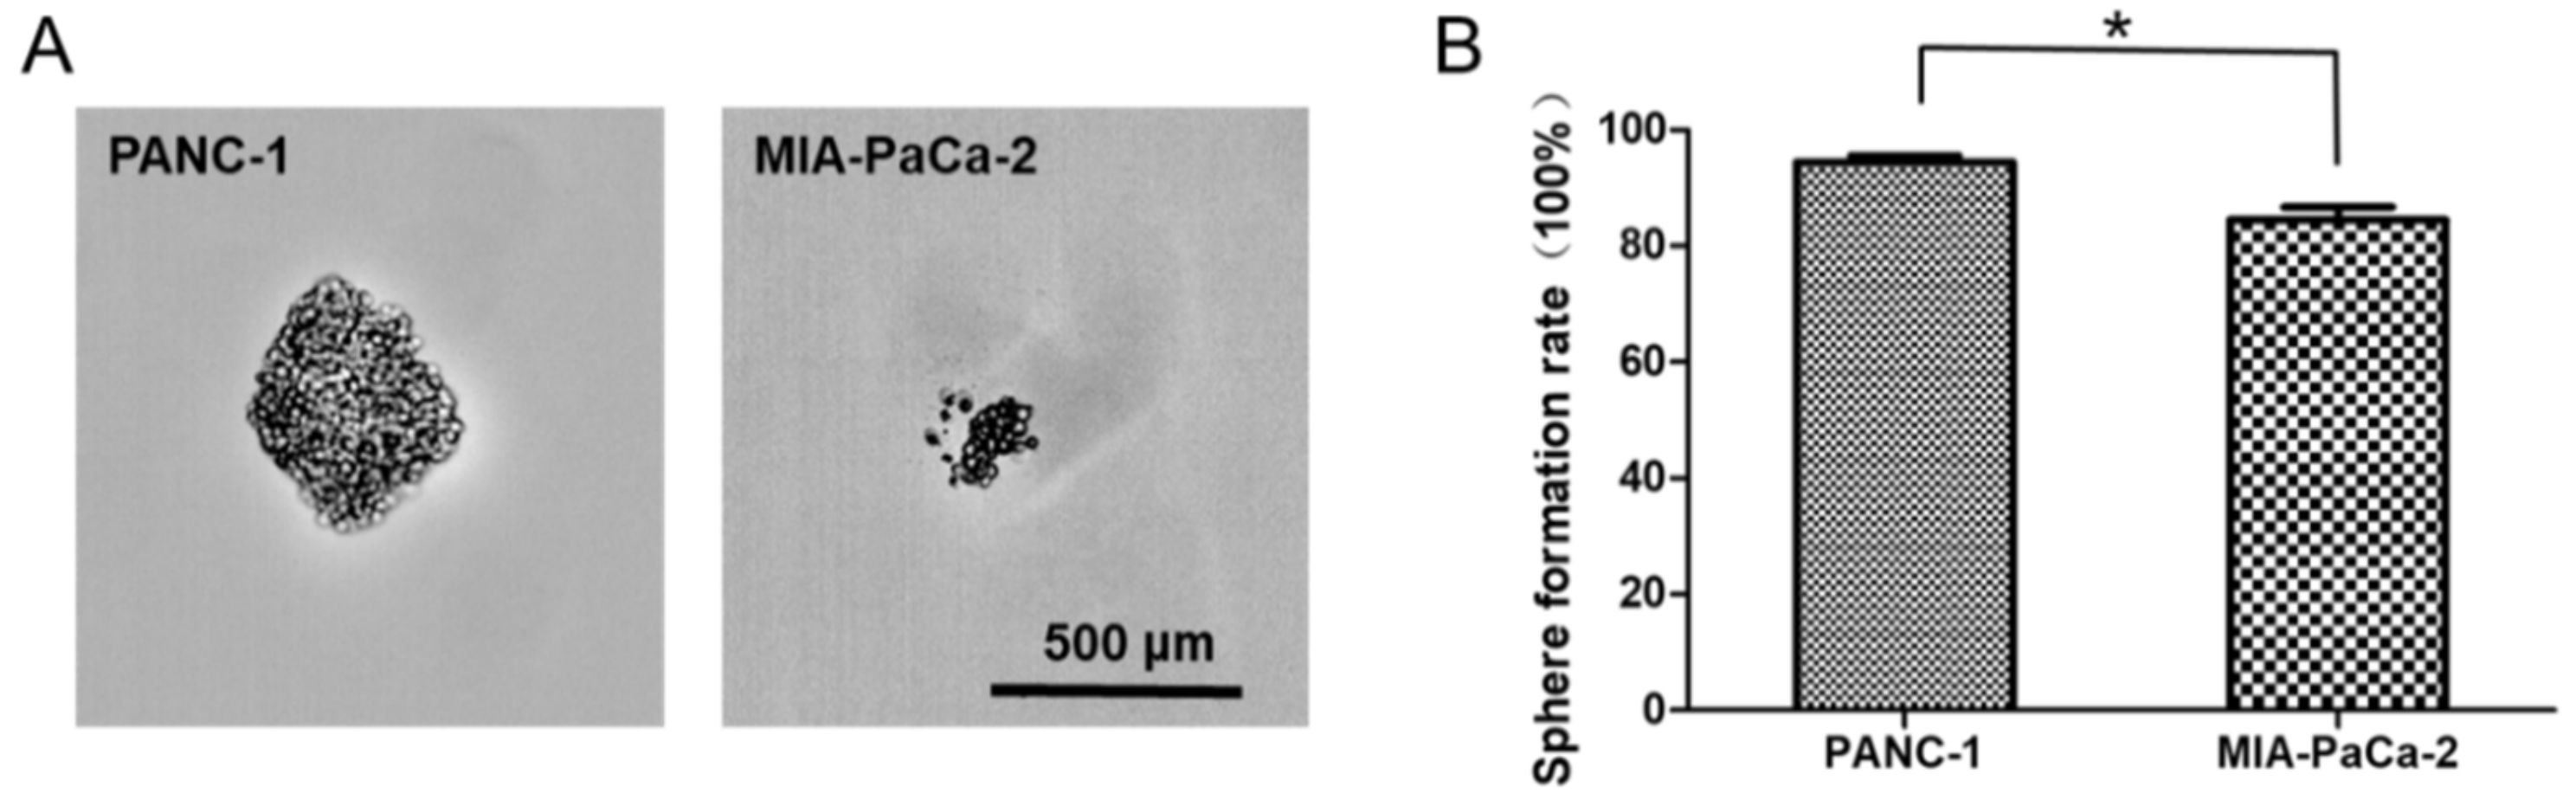 IJMS | Free Full-Text | Differentially Expressed microRNAs in MIA PaCa-2  and PANC-1 Pancreas Ductal Adenocarcinoma Cell Lines are Involved in Cancer  Stem Cell Regulation | HTML